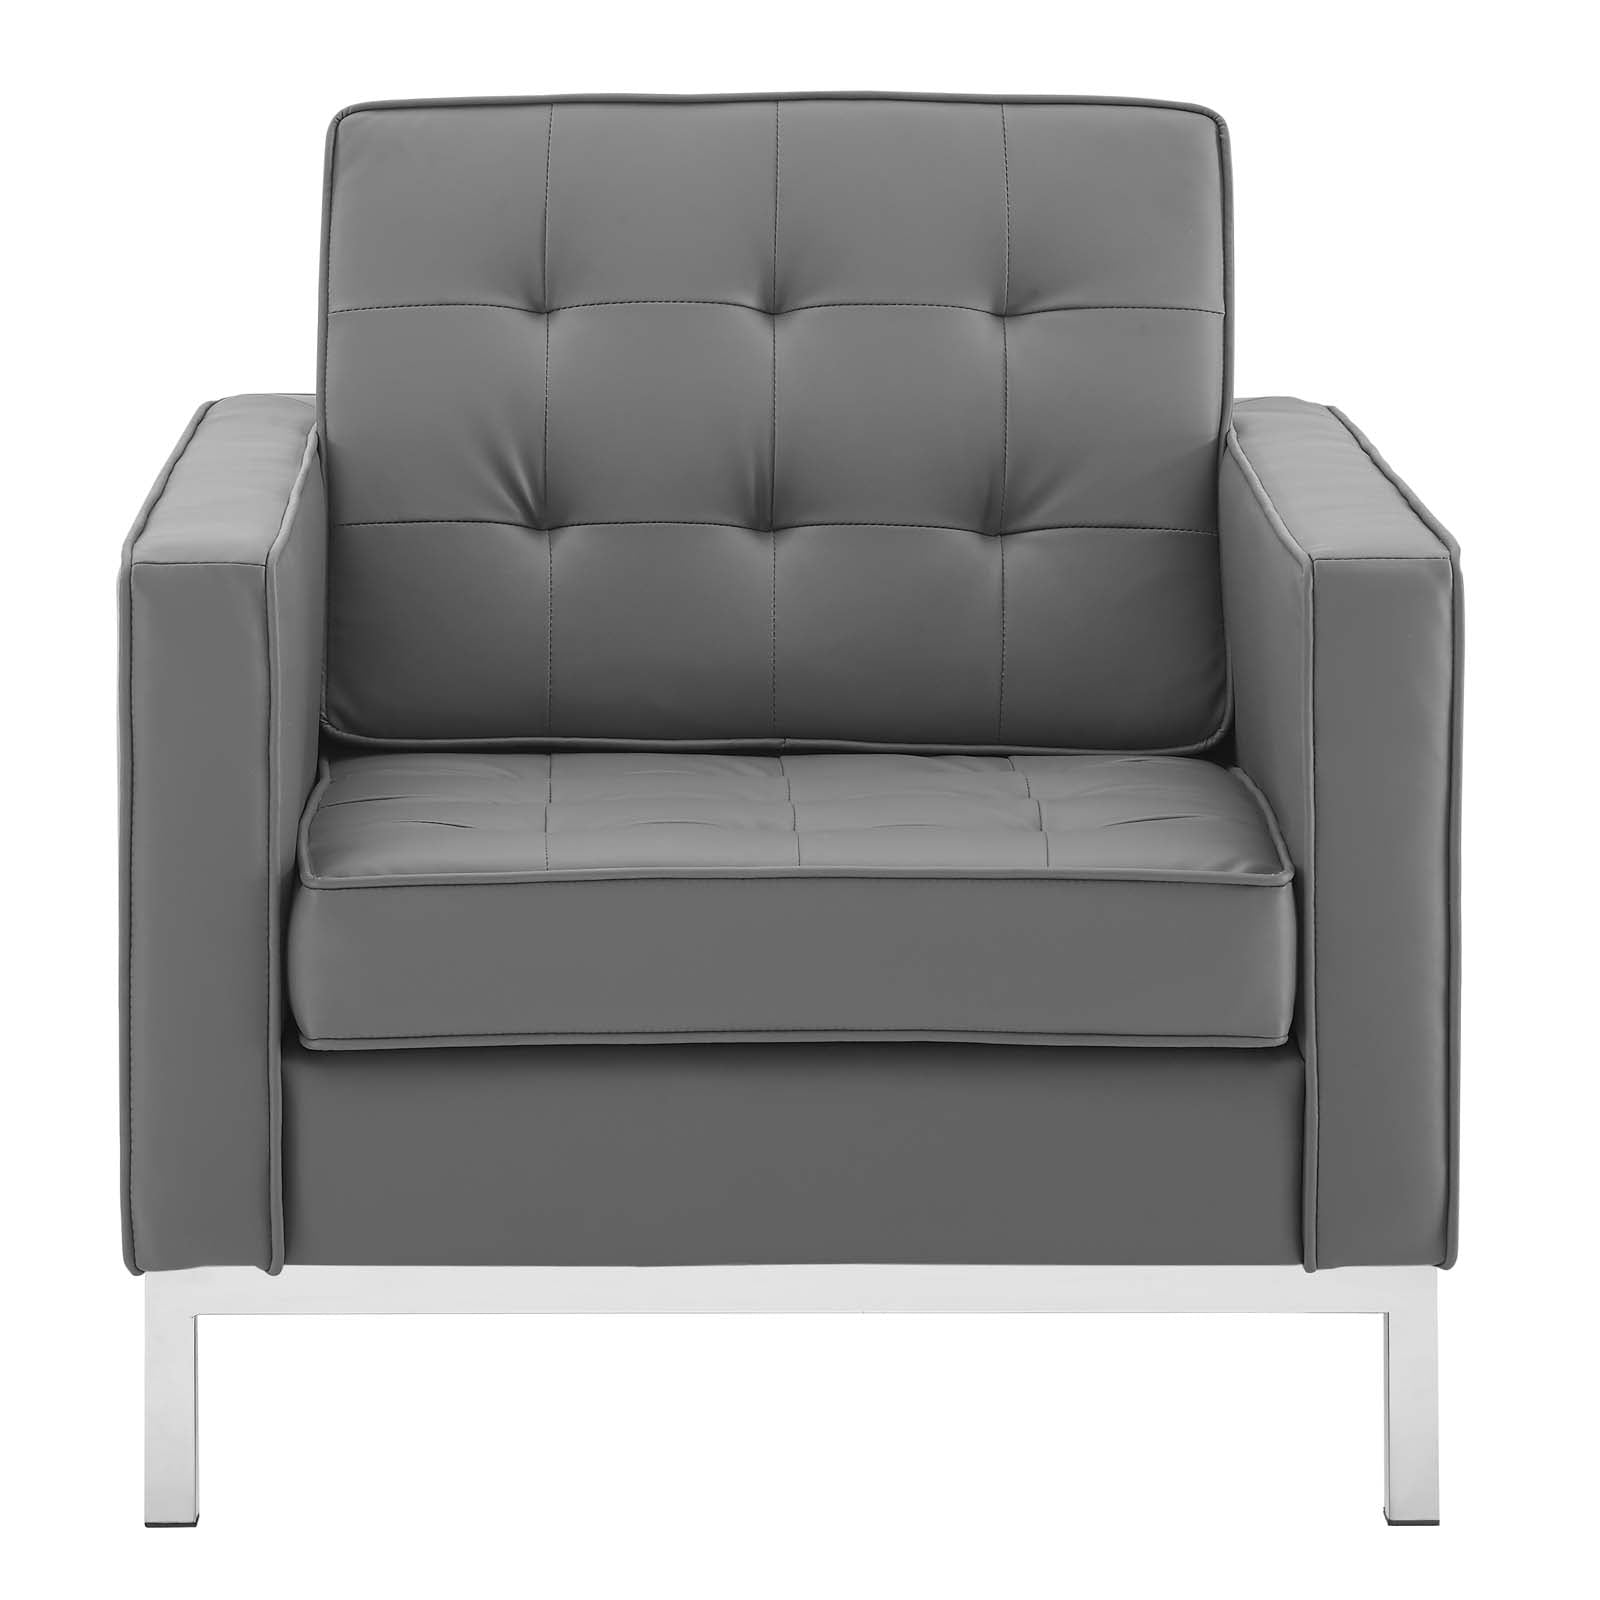 Modway Accent Chairs - Loft Tufted Upholstered Faux Leather Armchair Silver Gray